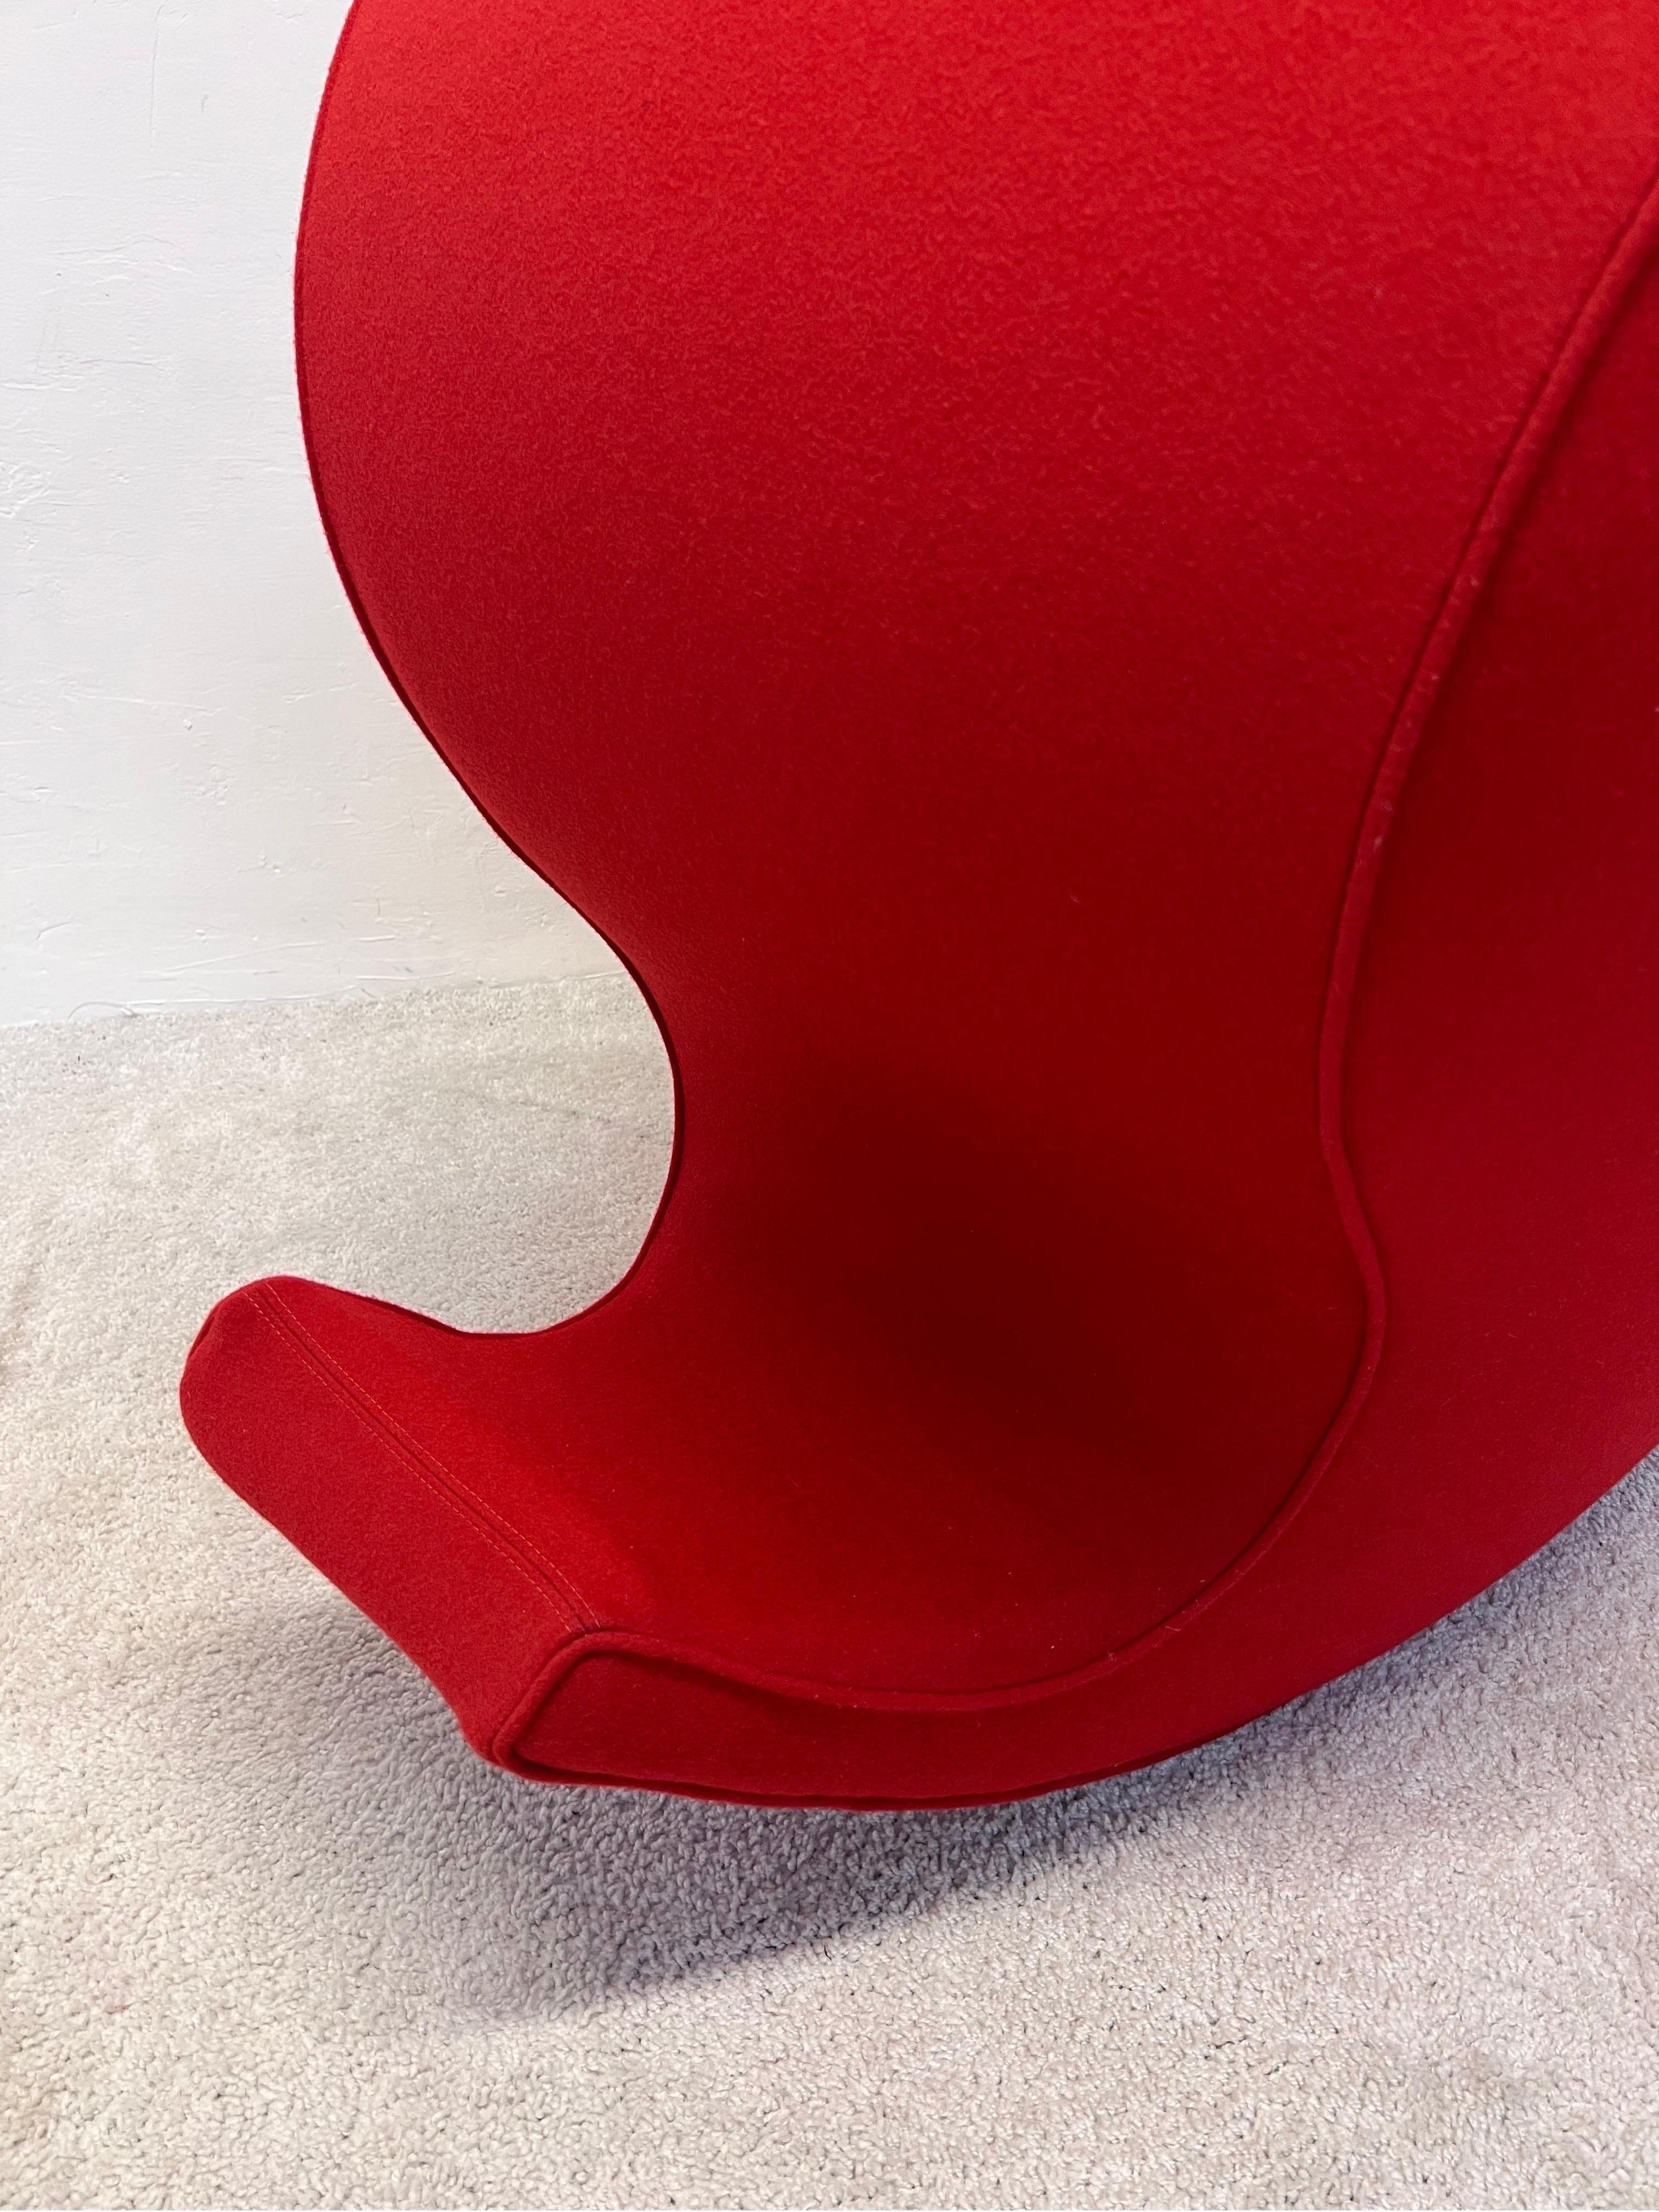 Ron Arad Spring Collection Soft Heart Chair for Moroso For Sale 1